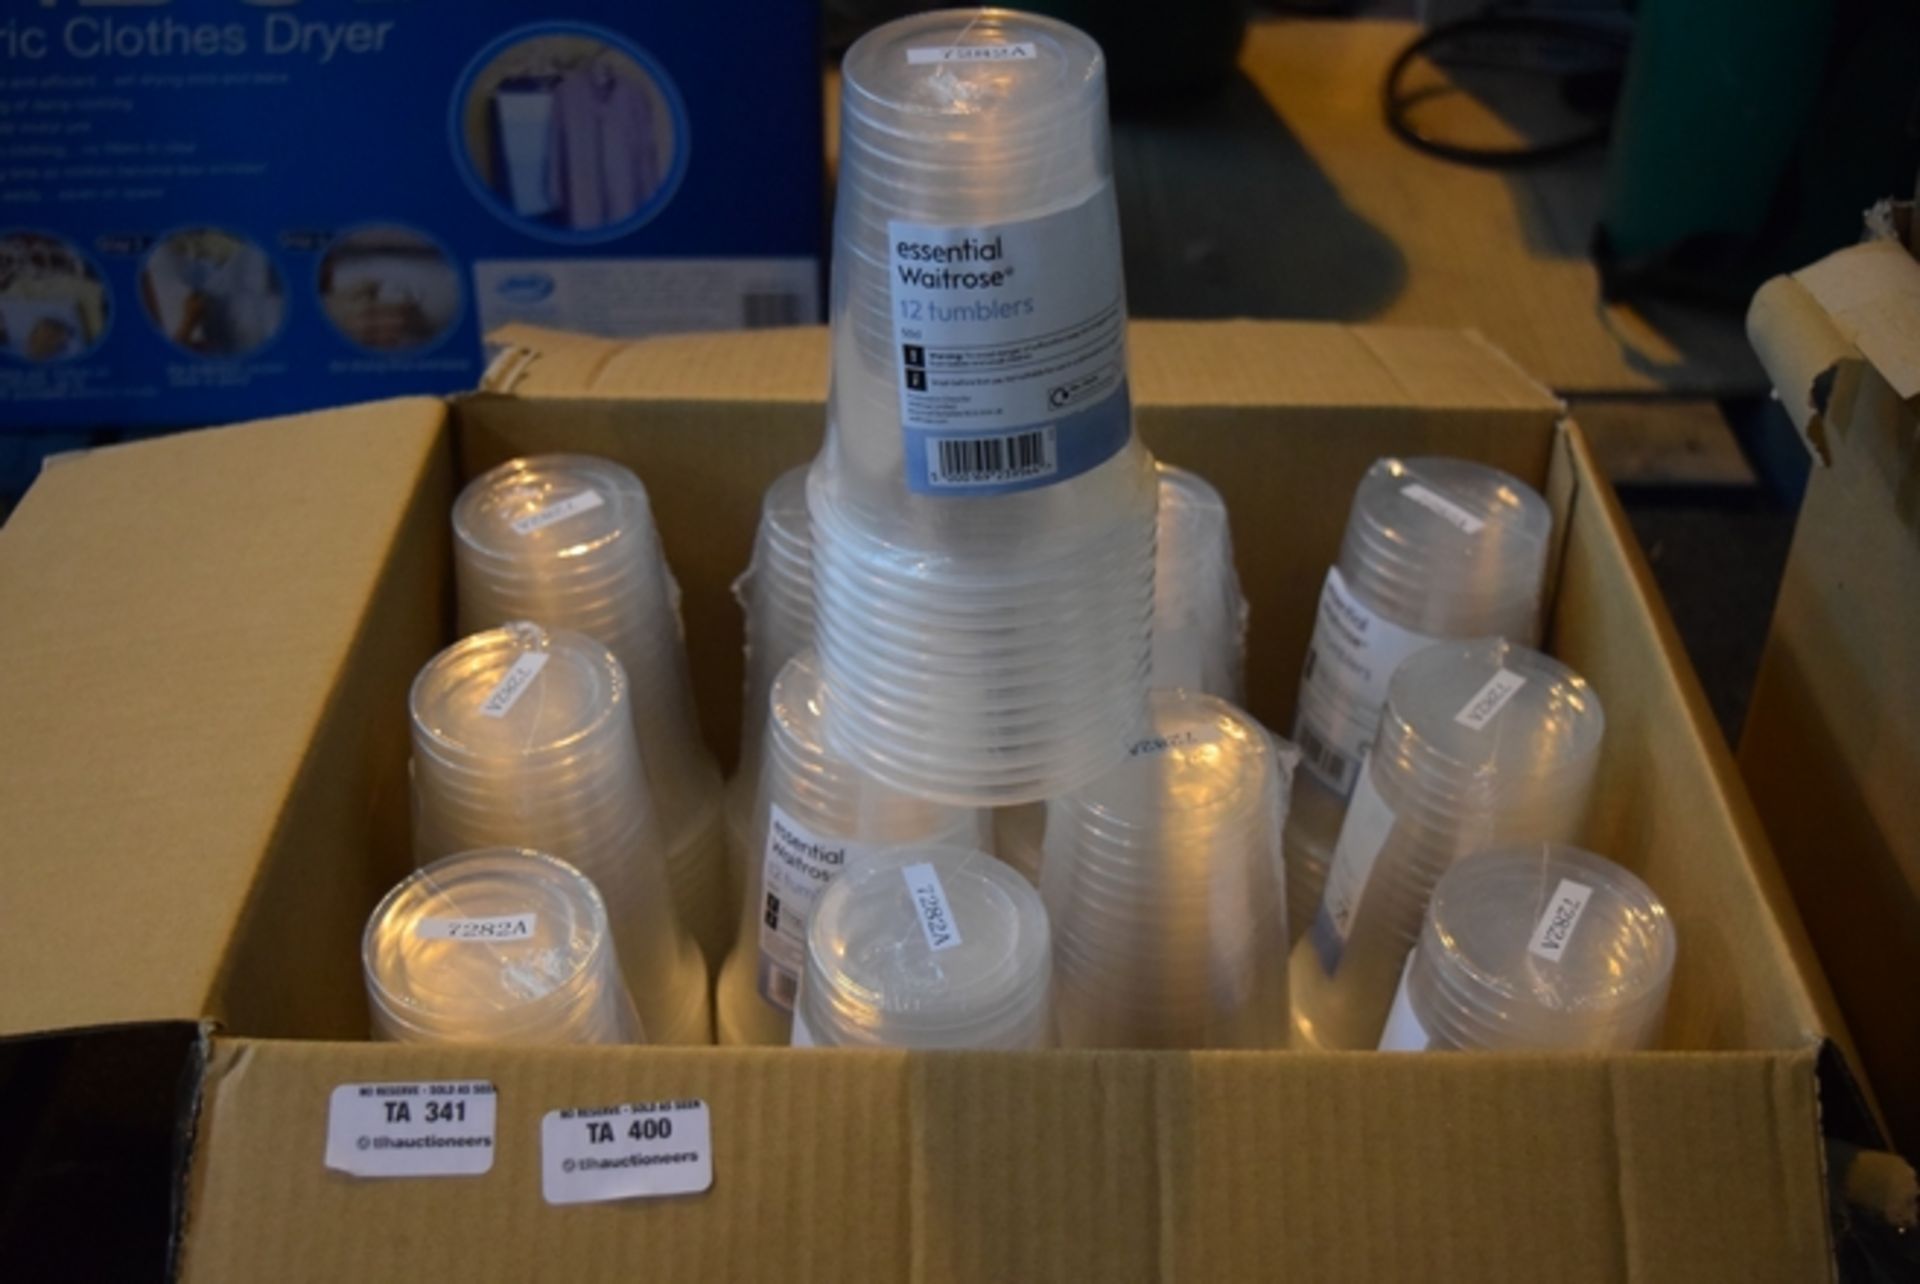 1X BOX CONTAINING 12X BRAND NEW PACKS OF 12 ESSENTIAL WAITROSE TUMBLERS (PERFECT FOR XMAS PARTIES)